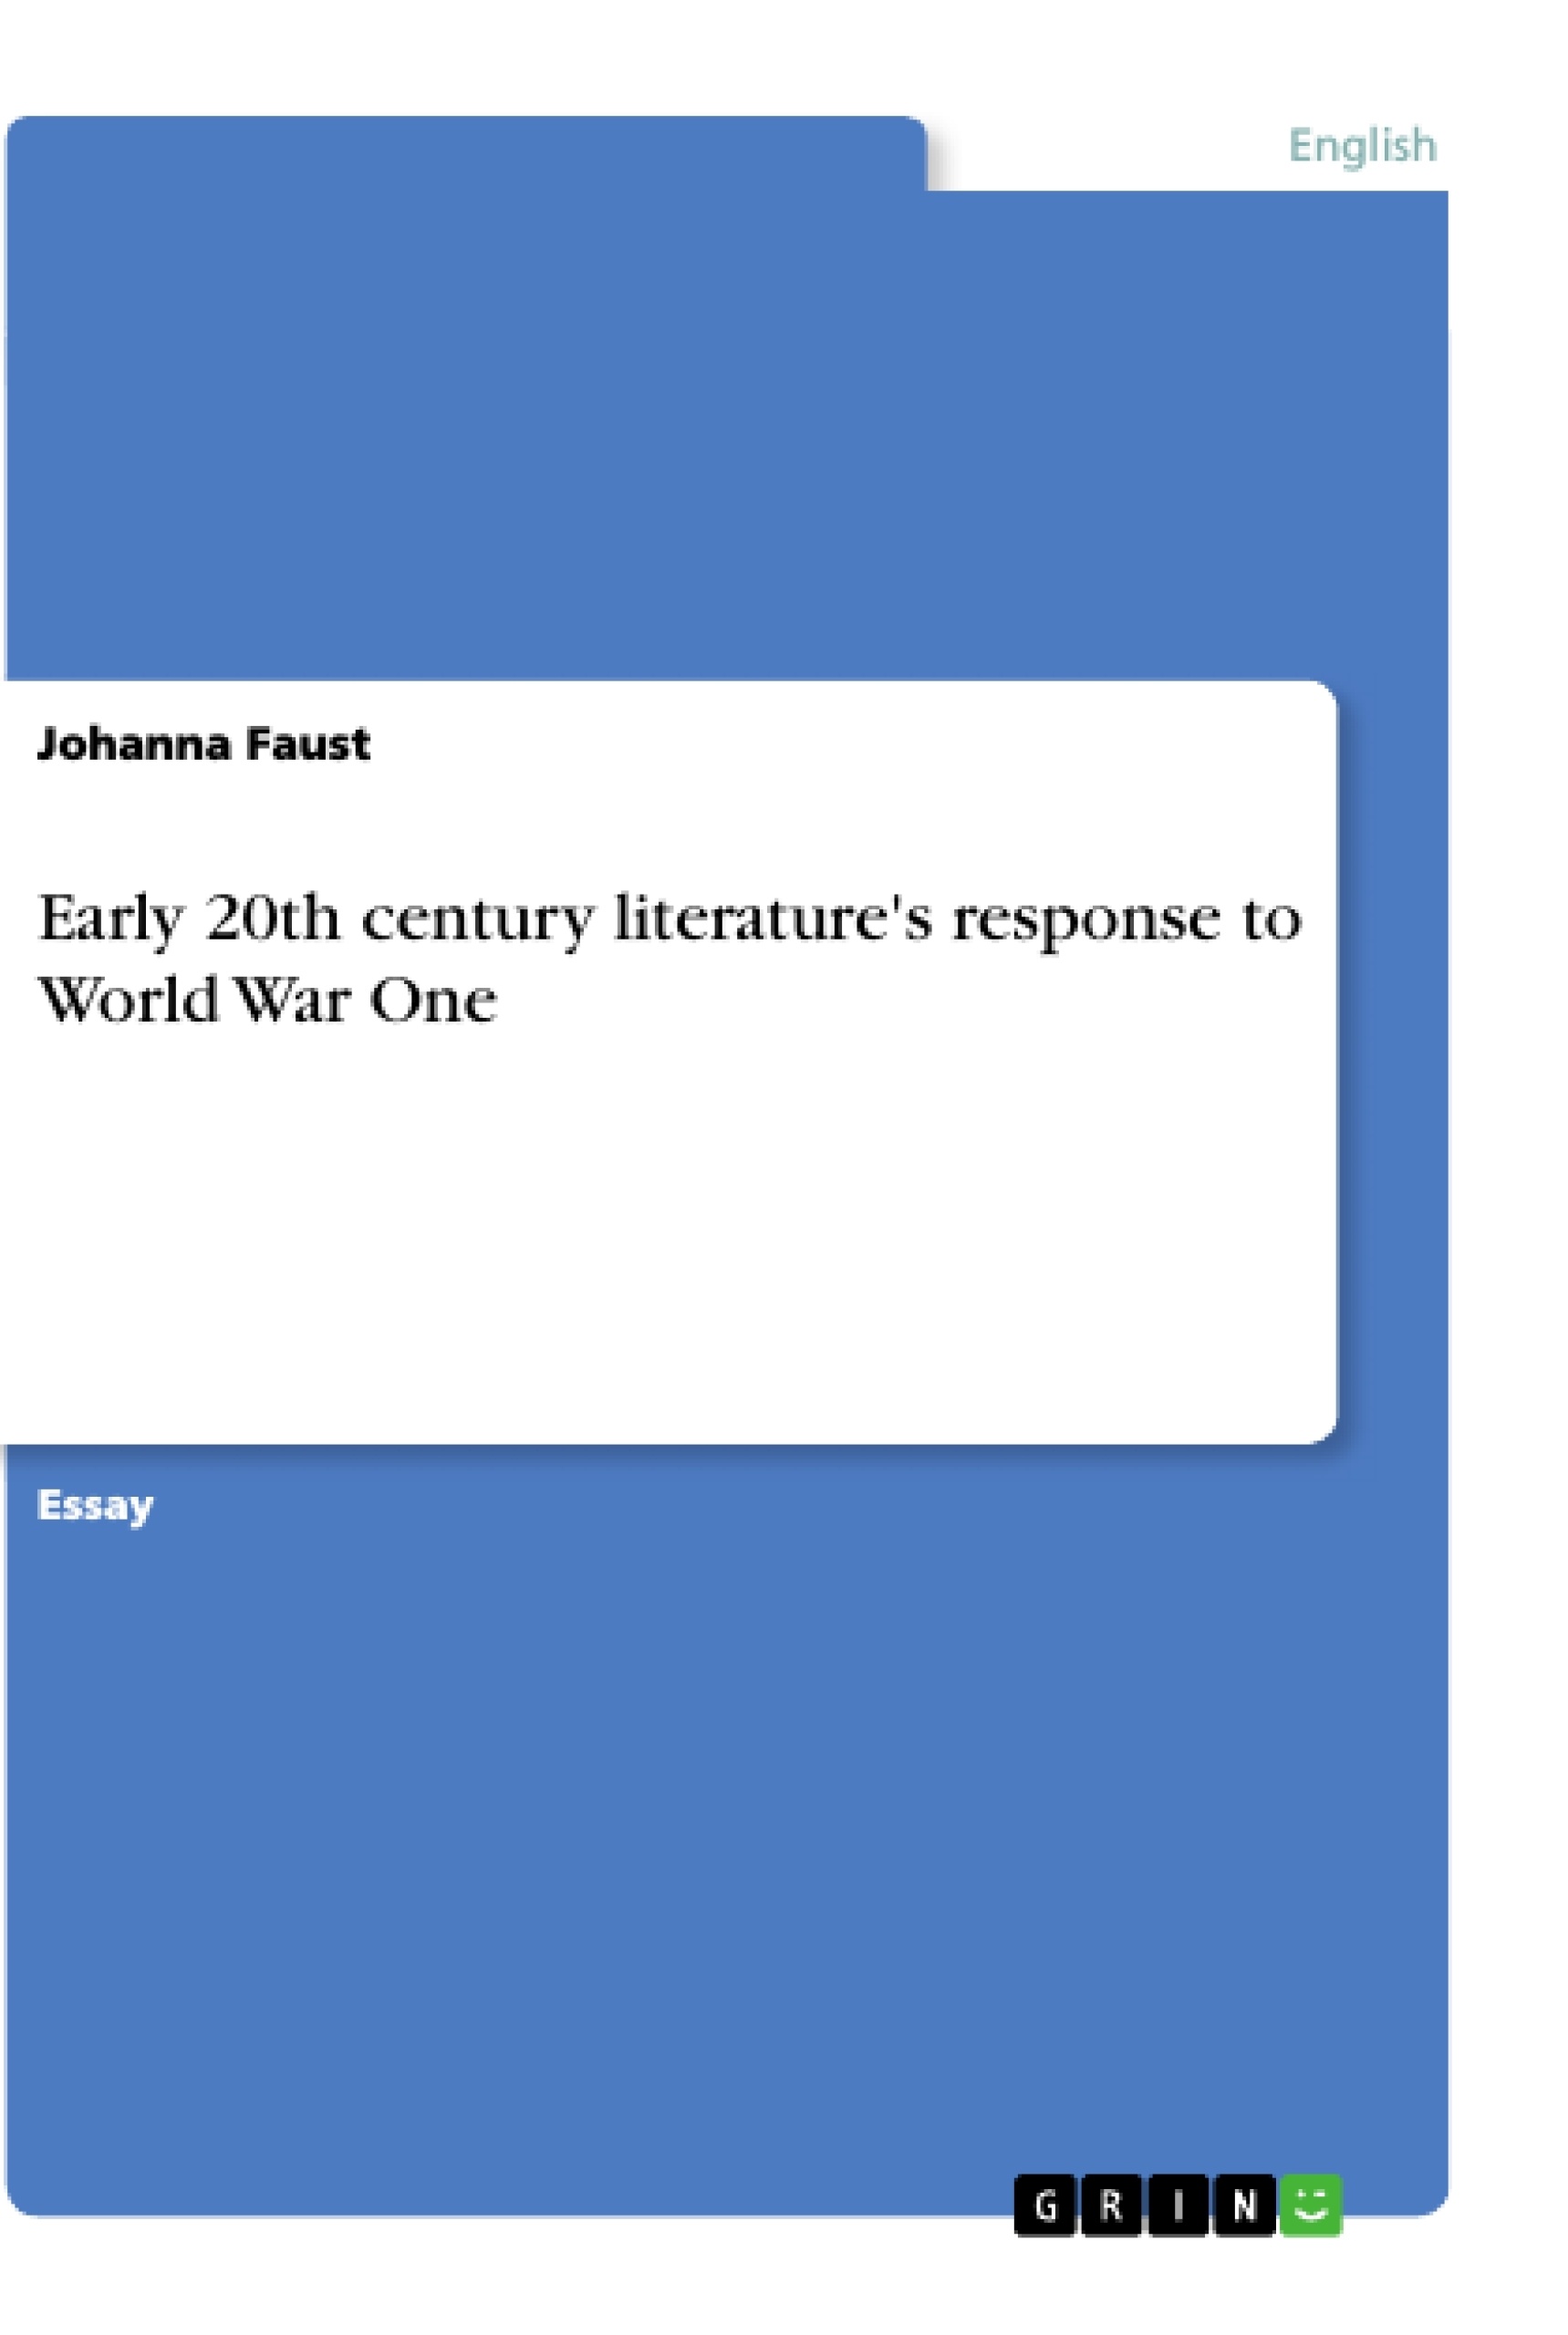 Title: Early 20th century literature's response to World War One